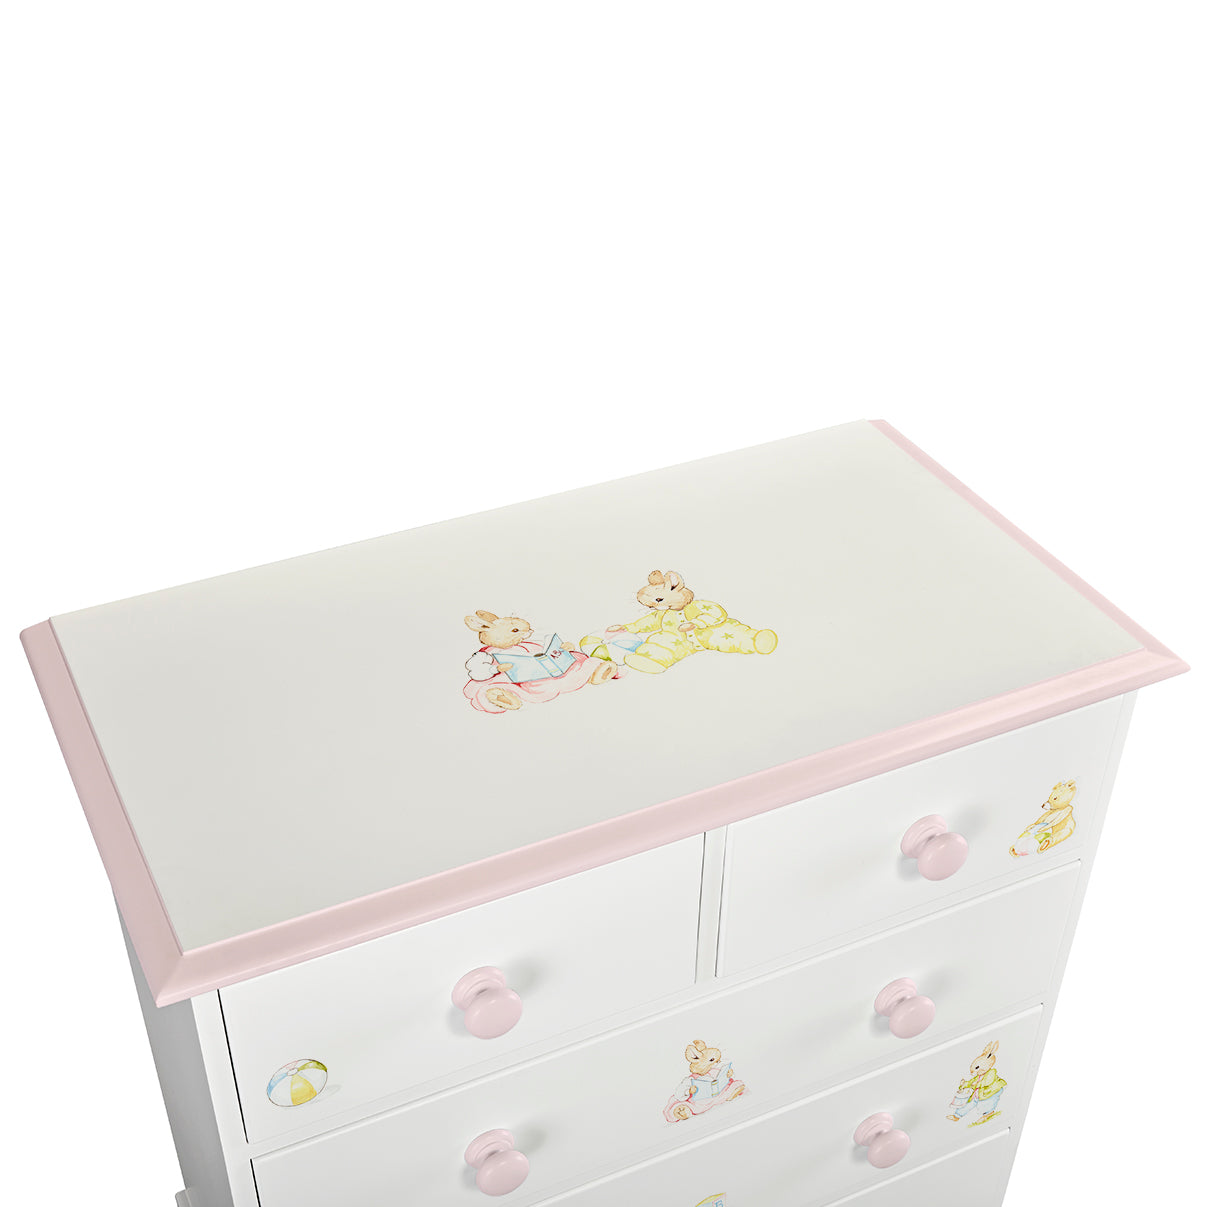 Large Chest of Drawers - Barbara's Bunnies with Dragons Pink Trim